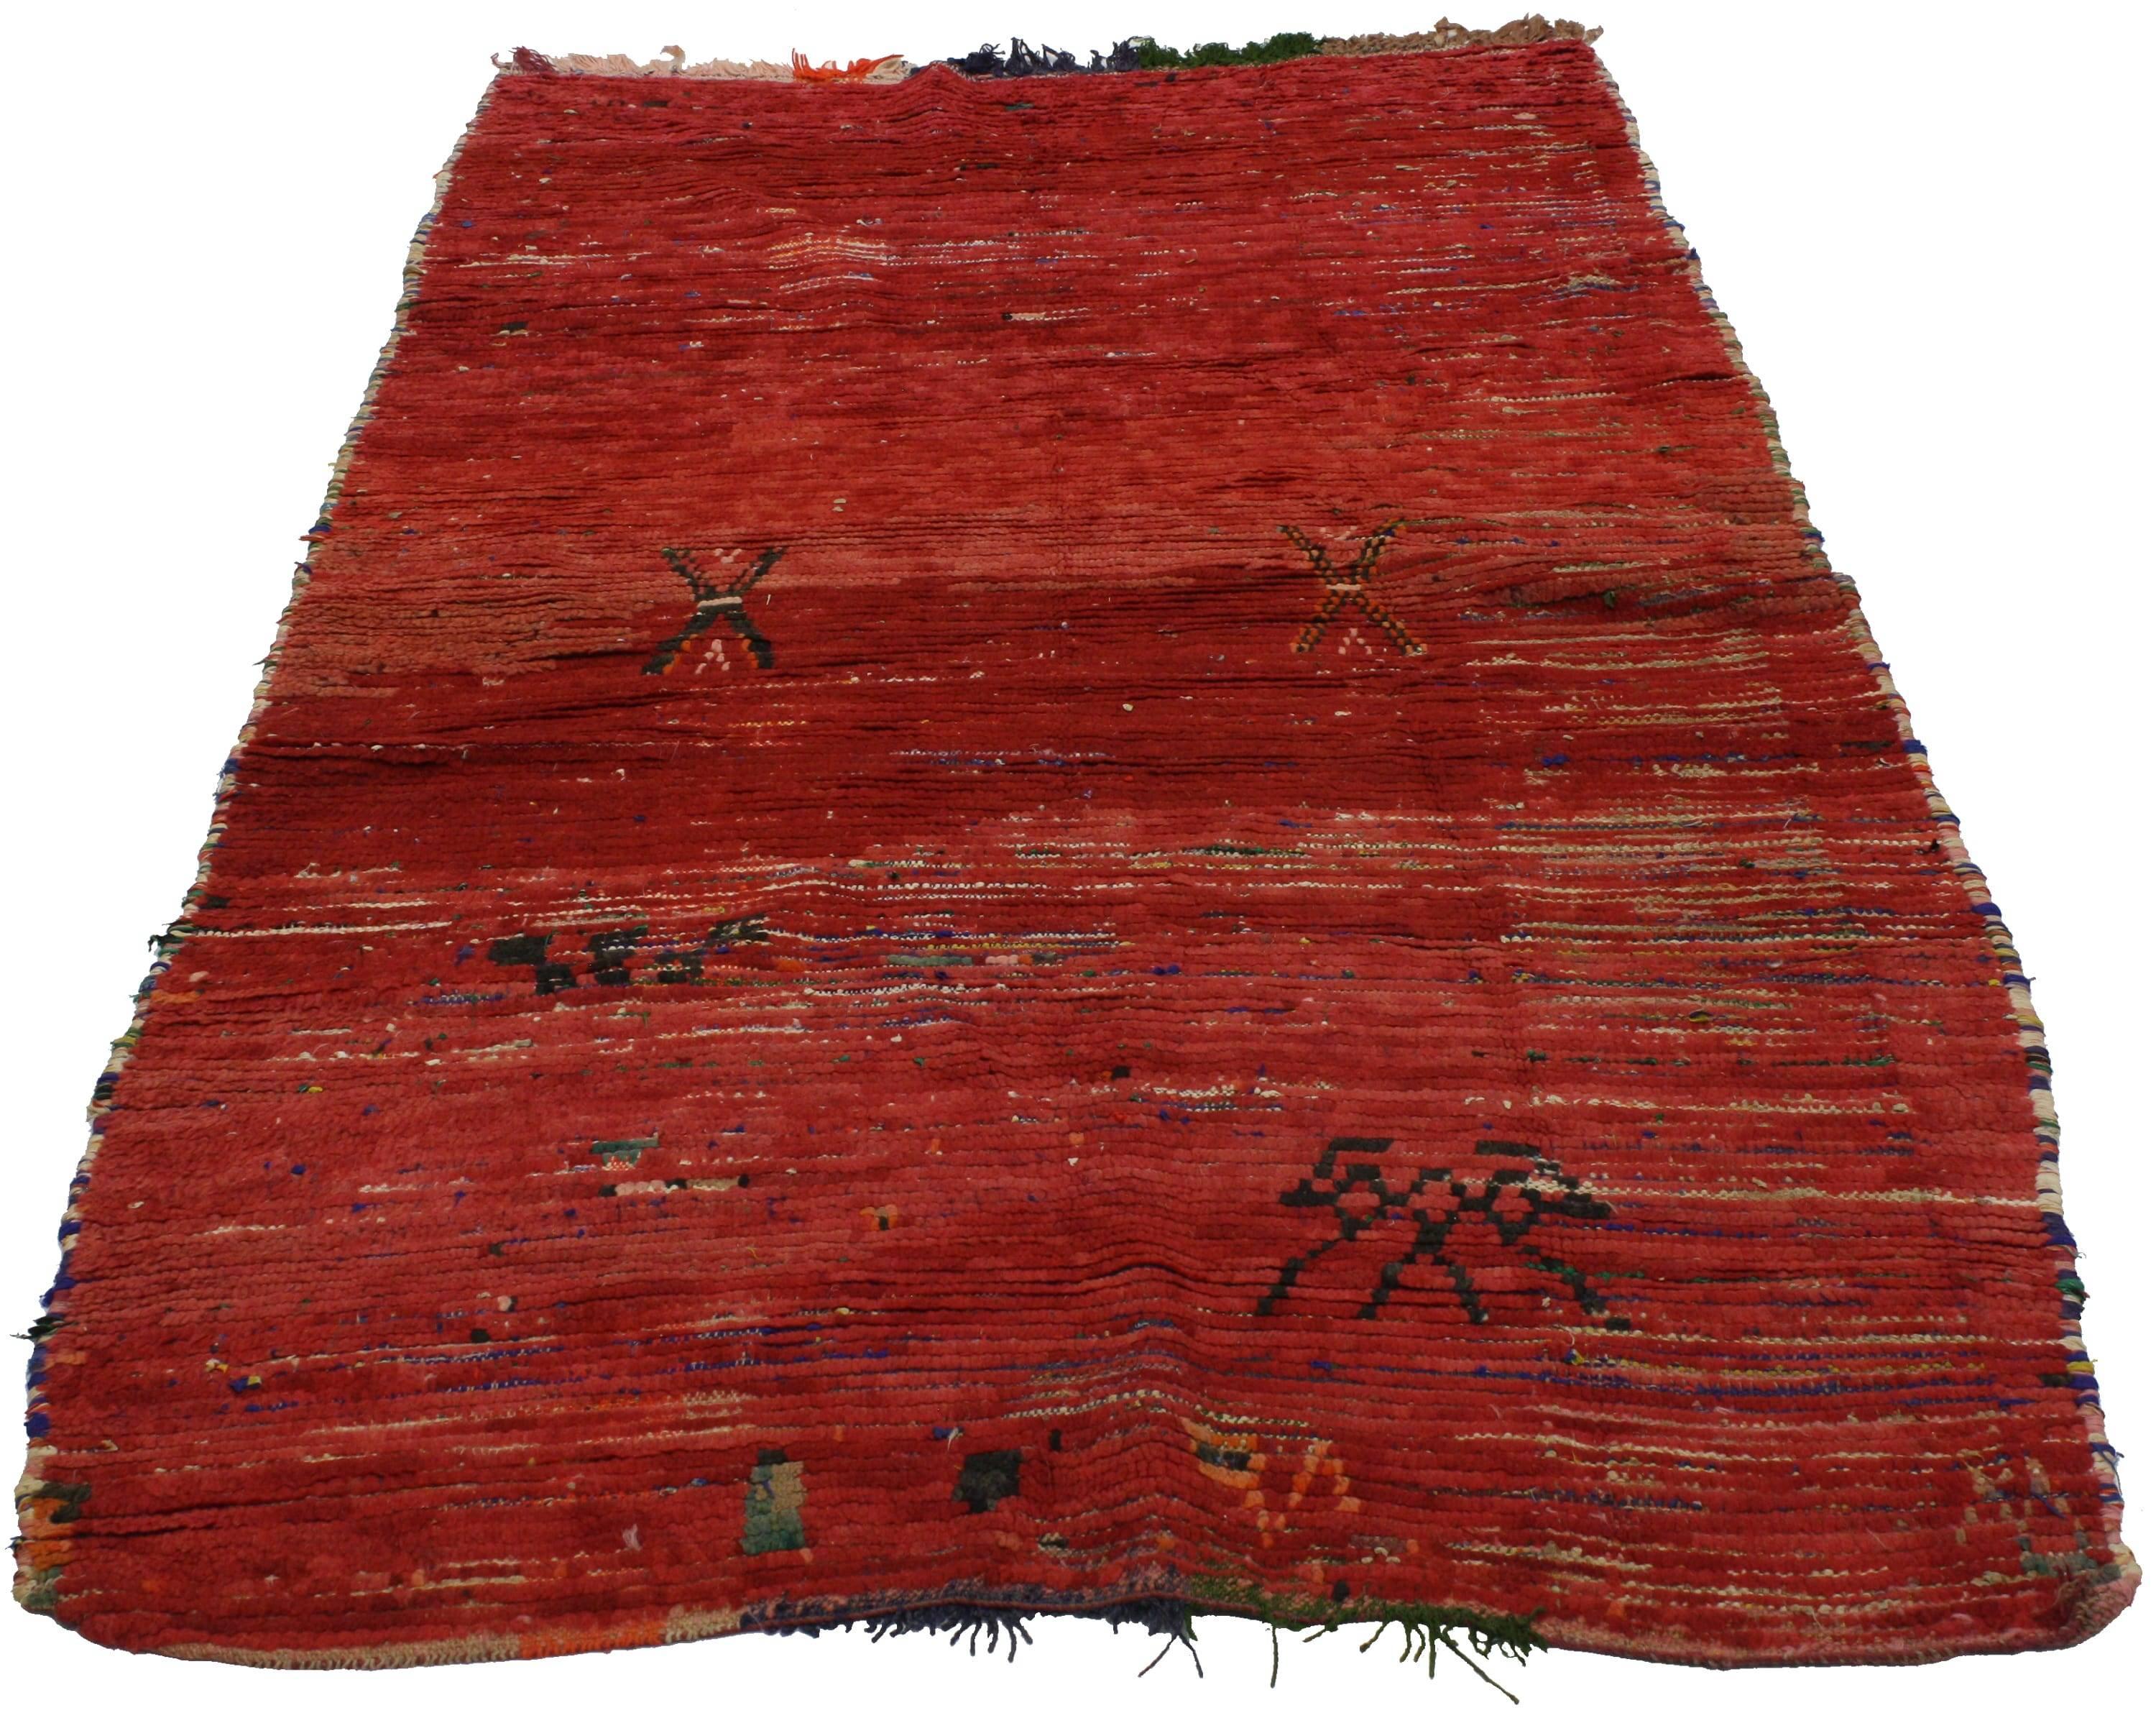 20317, vintage Berber Moroccan rug. A beautiful blend of deep red and softer tones come together to create imagery of a blazing Moroccan sunset. The rich waves of abrash is erratic yet harmonious at the same time on this hand-knotted wool vintage